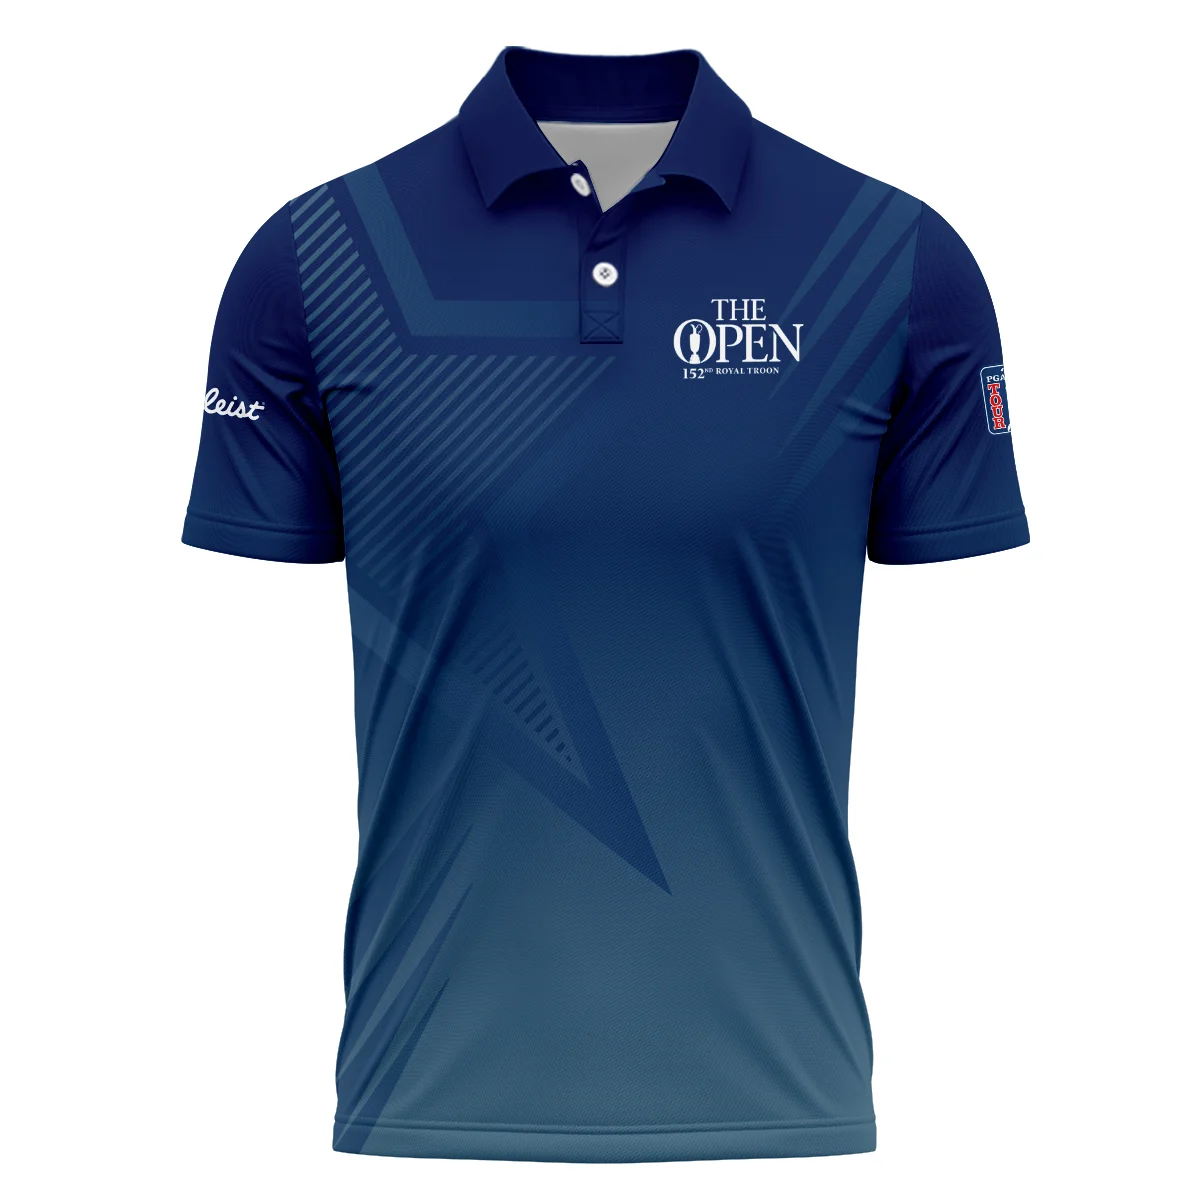 Titleist 152nd Open Championship Abstract Background Dark Blue Gradient Star Line Polo Shirt All Over Prints HOTOP260624A04TLPL